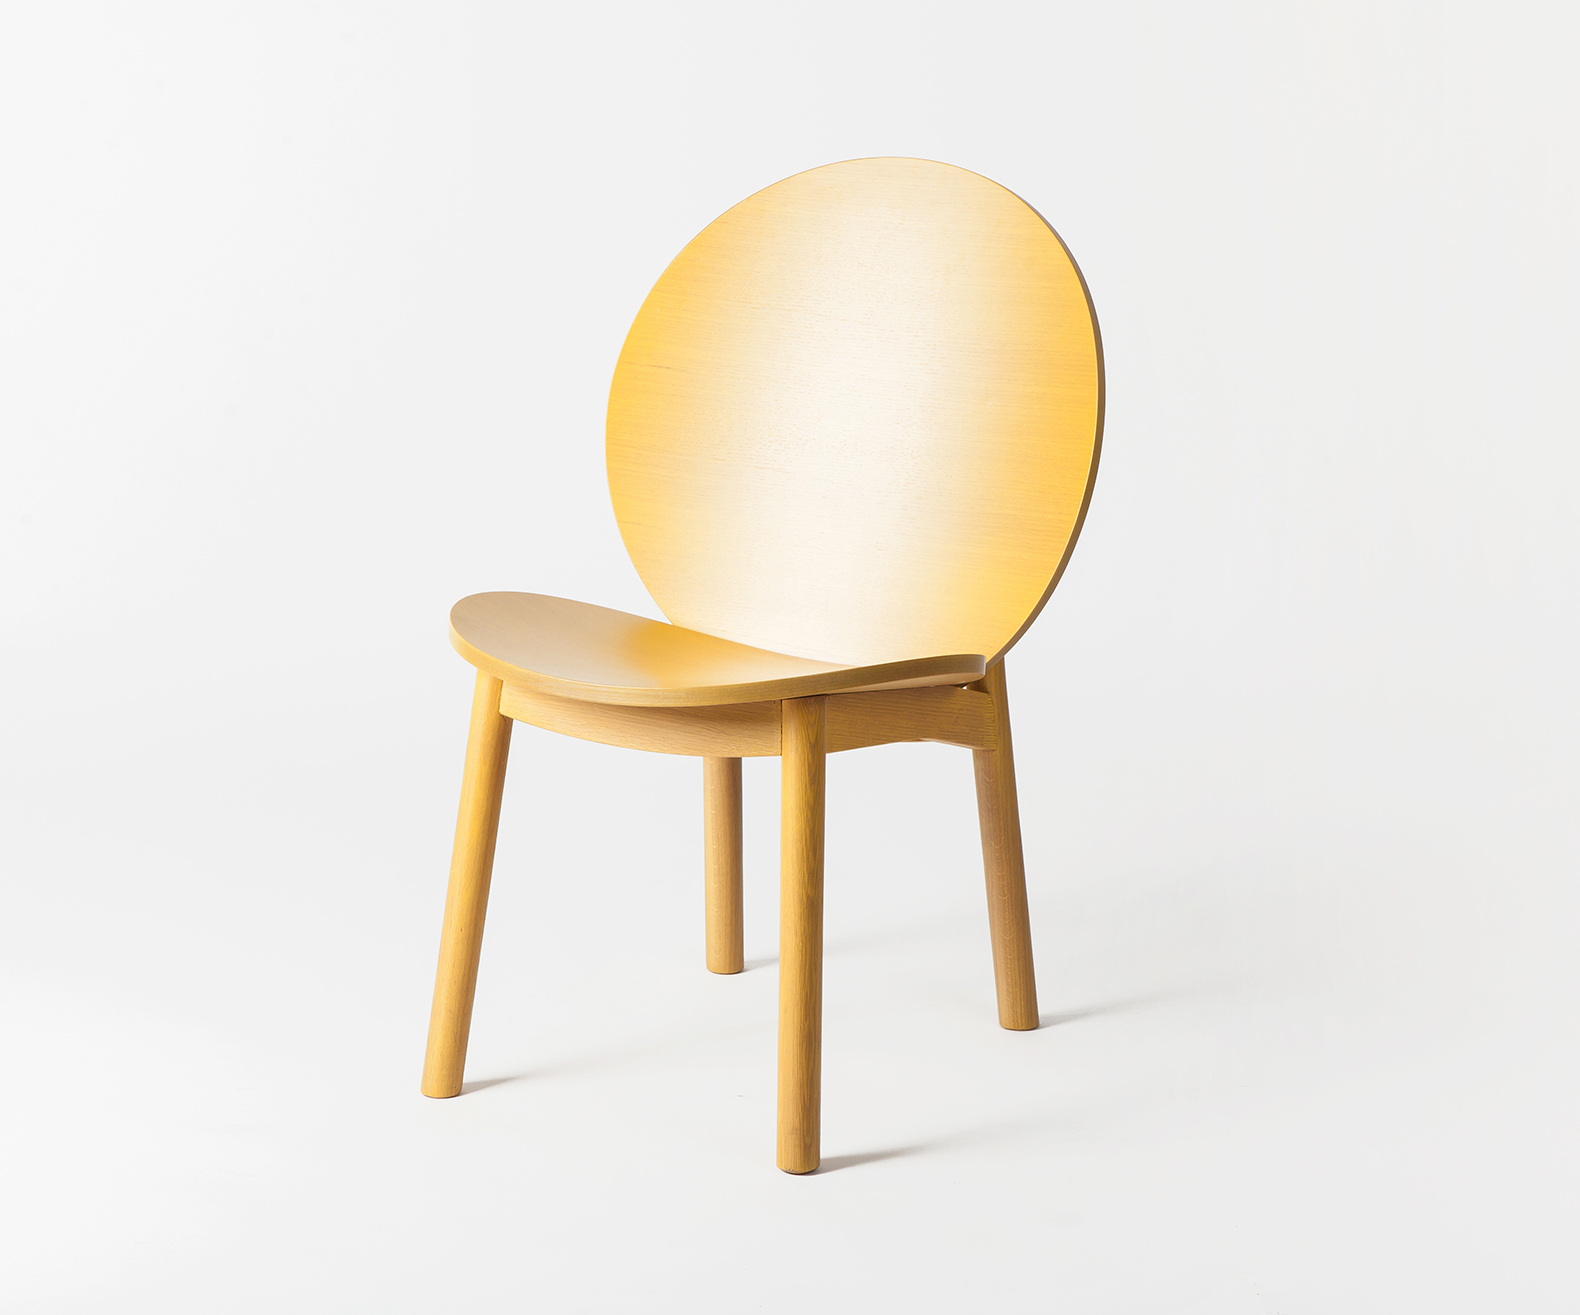 Moon Chair by Yong Jeong